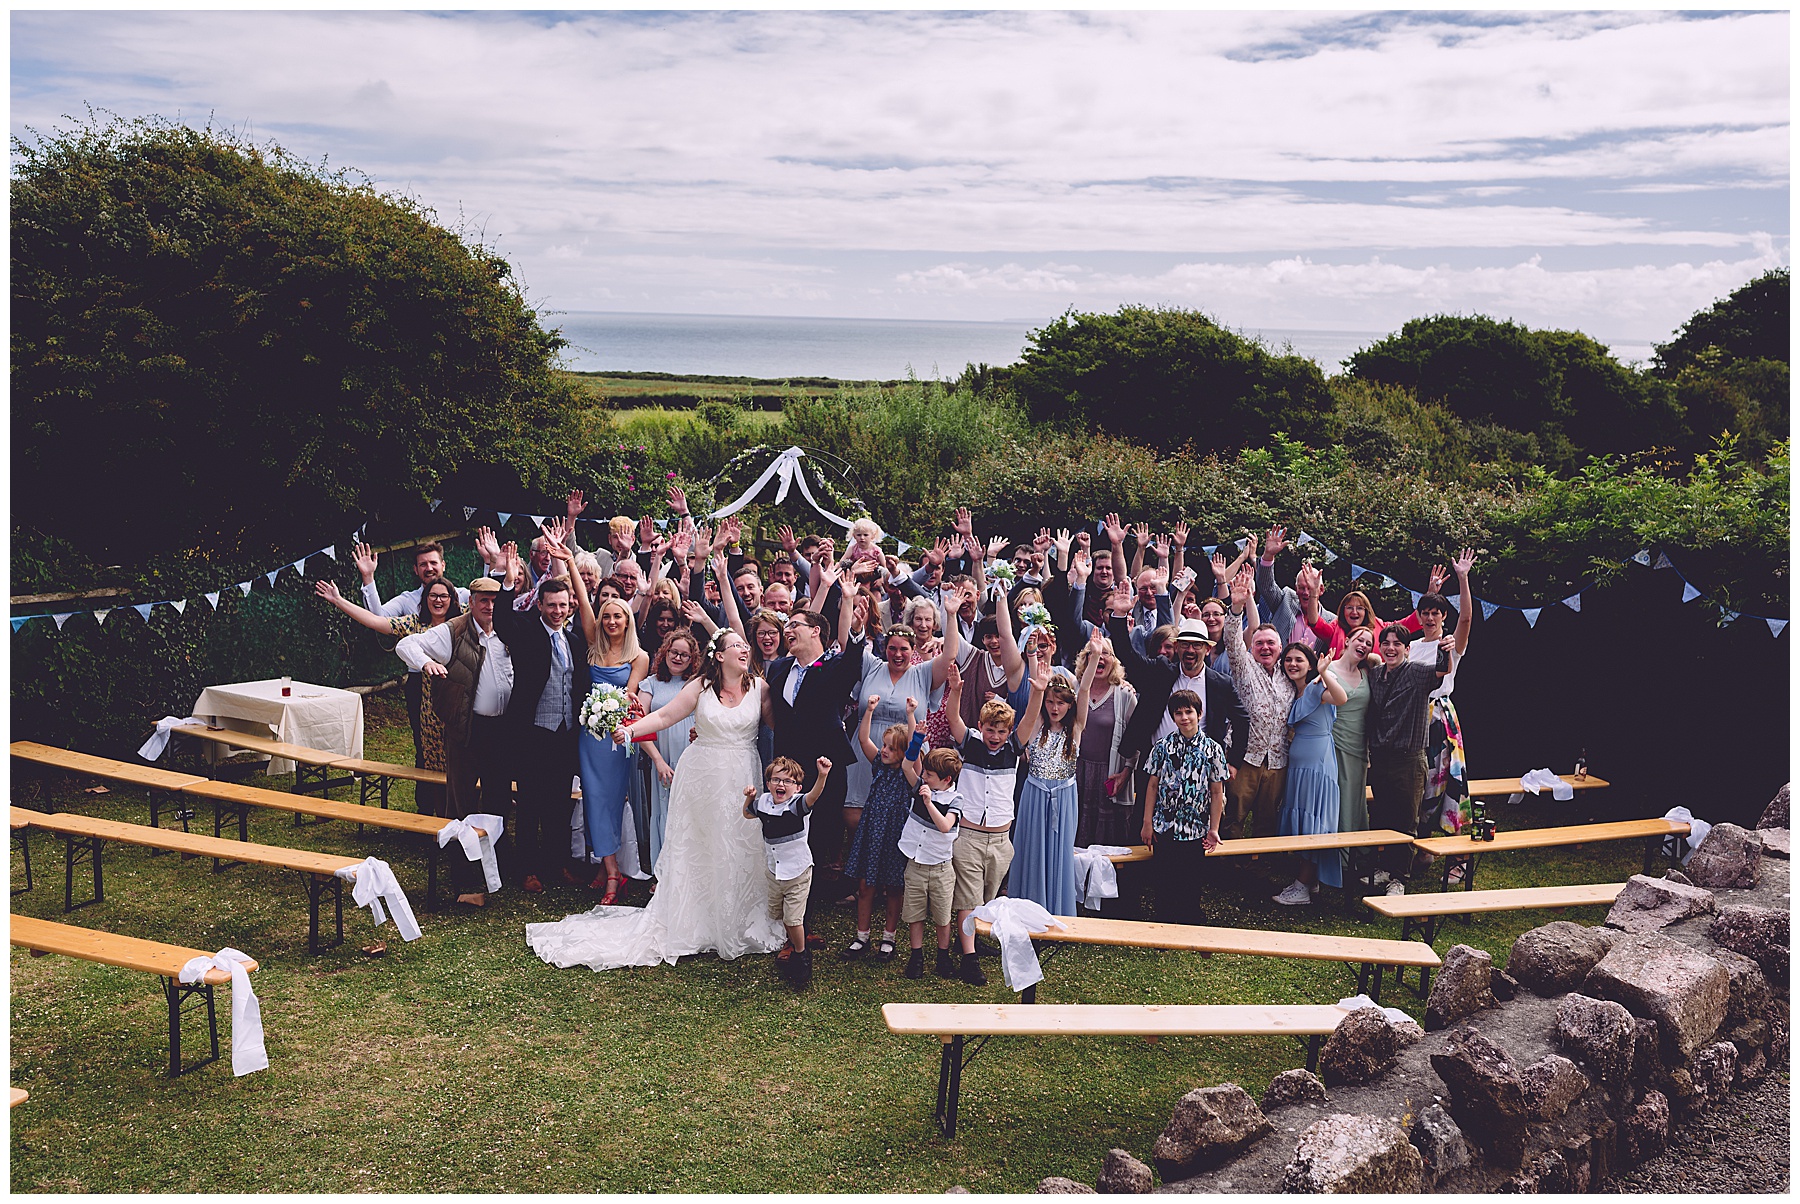 Wedding Guests at Rhossili Bunkhouse